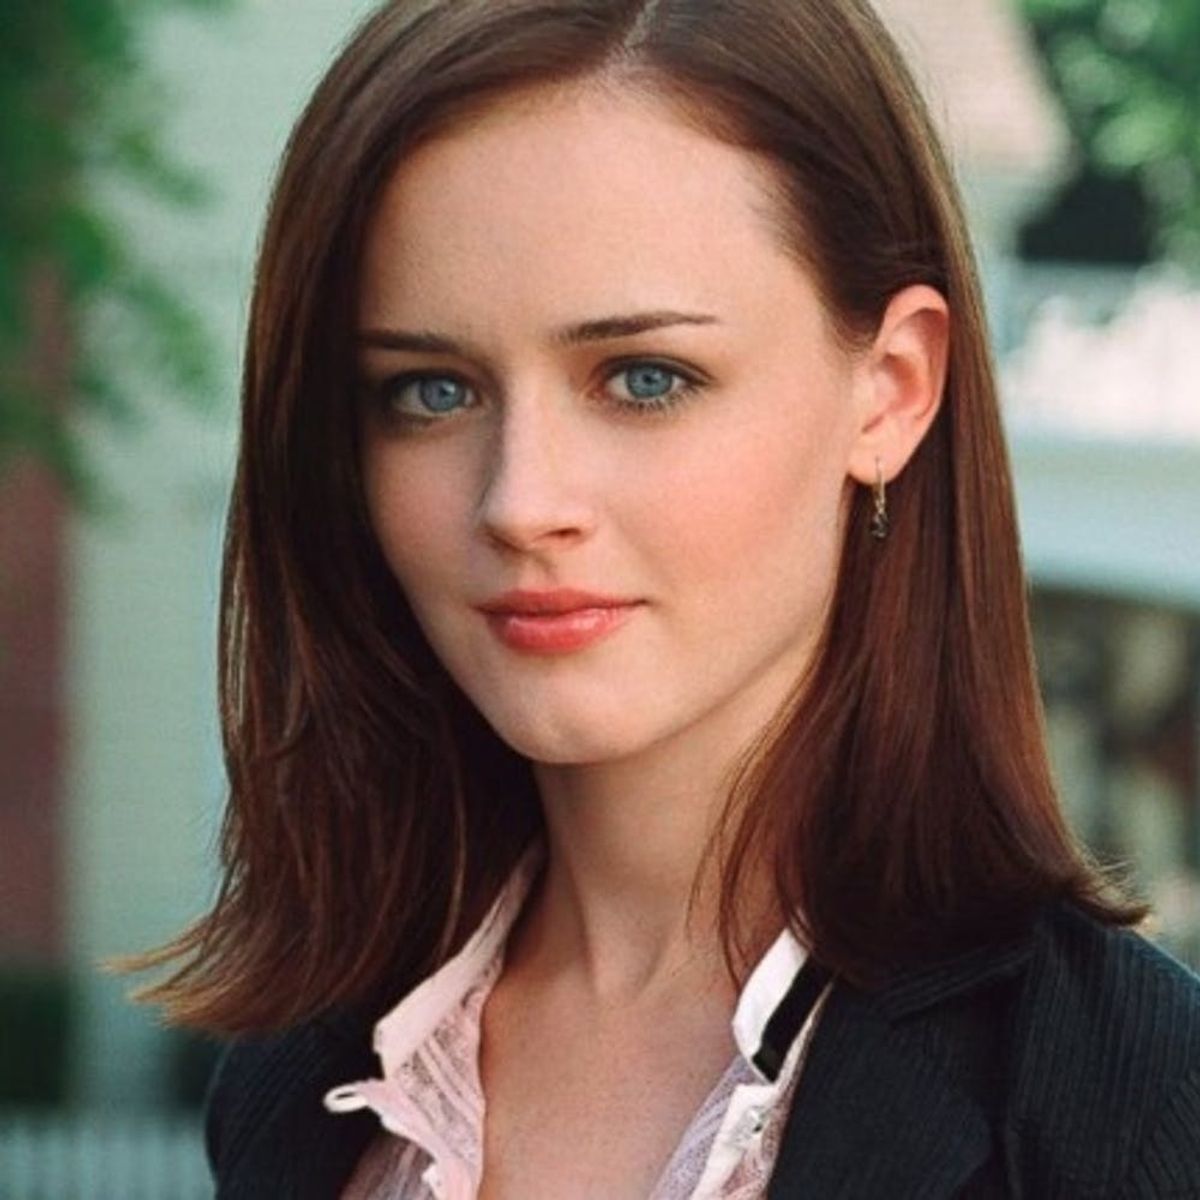 Alexis Bledel’s Next Role Is NOTHING like Gilmore Girls